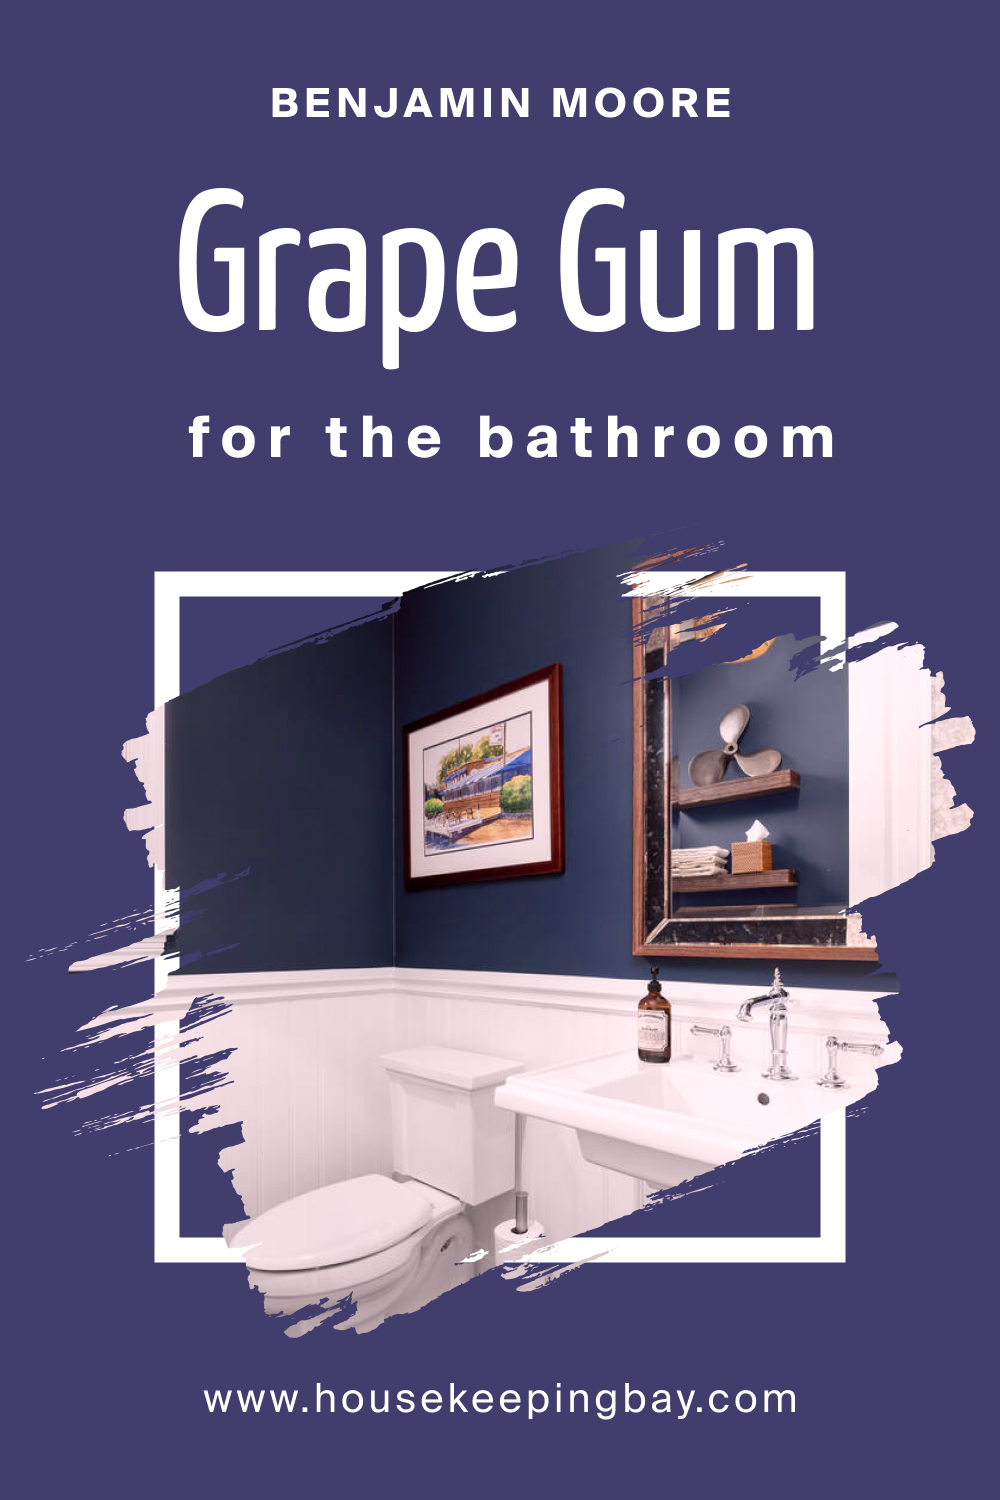 How to Use BM Grape Gum 2068-20 in the Bathroom?